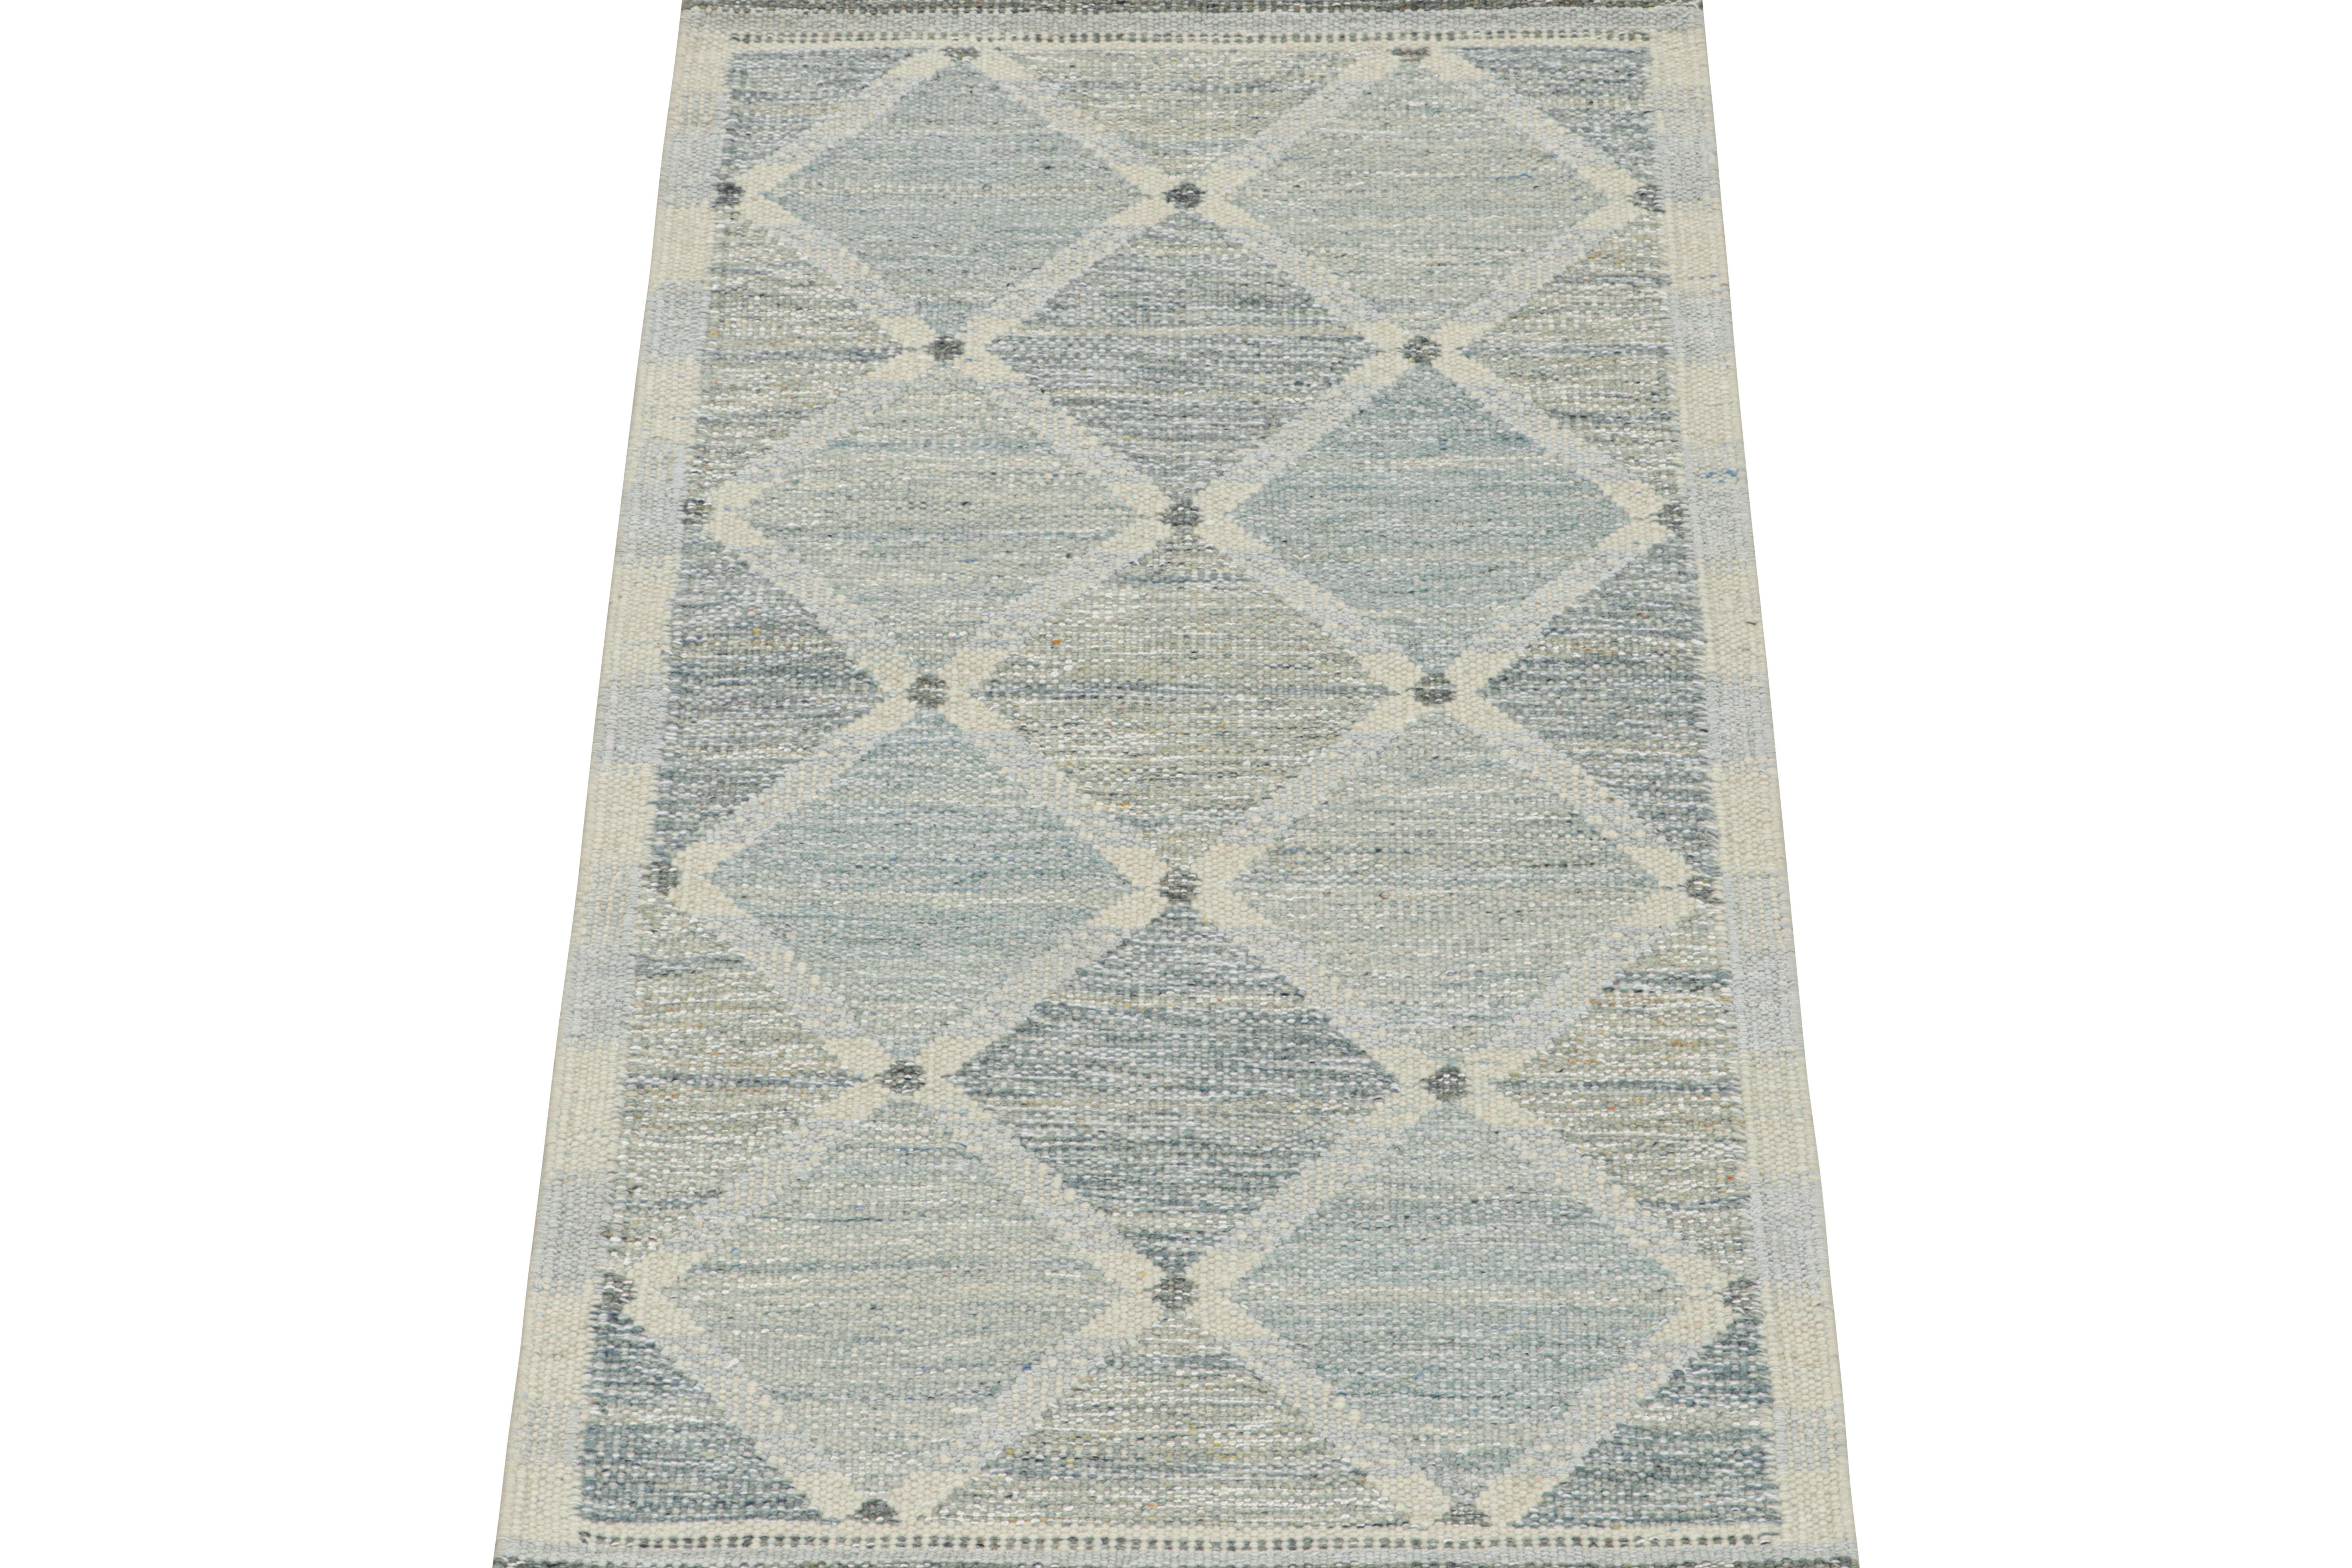 This 3x6 flat weave runner is a bold new addition to the Scandinavian Collection by Rug & Kilim. Handwoven in wool and natural yarns, its design reflects a contemporary take on mid-century Rollakans and Swedish Deco style.

On the Design:

This